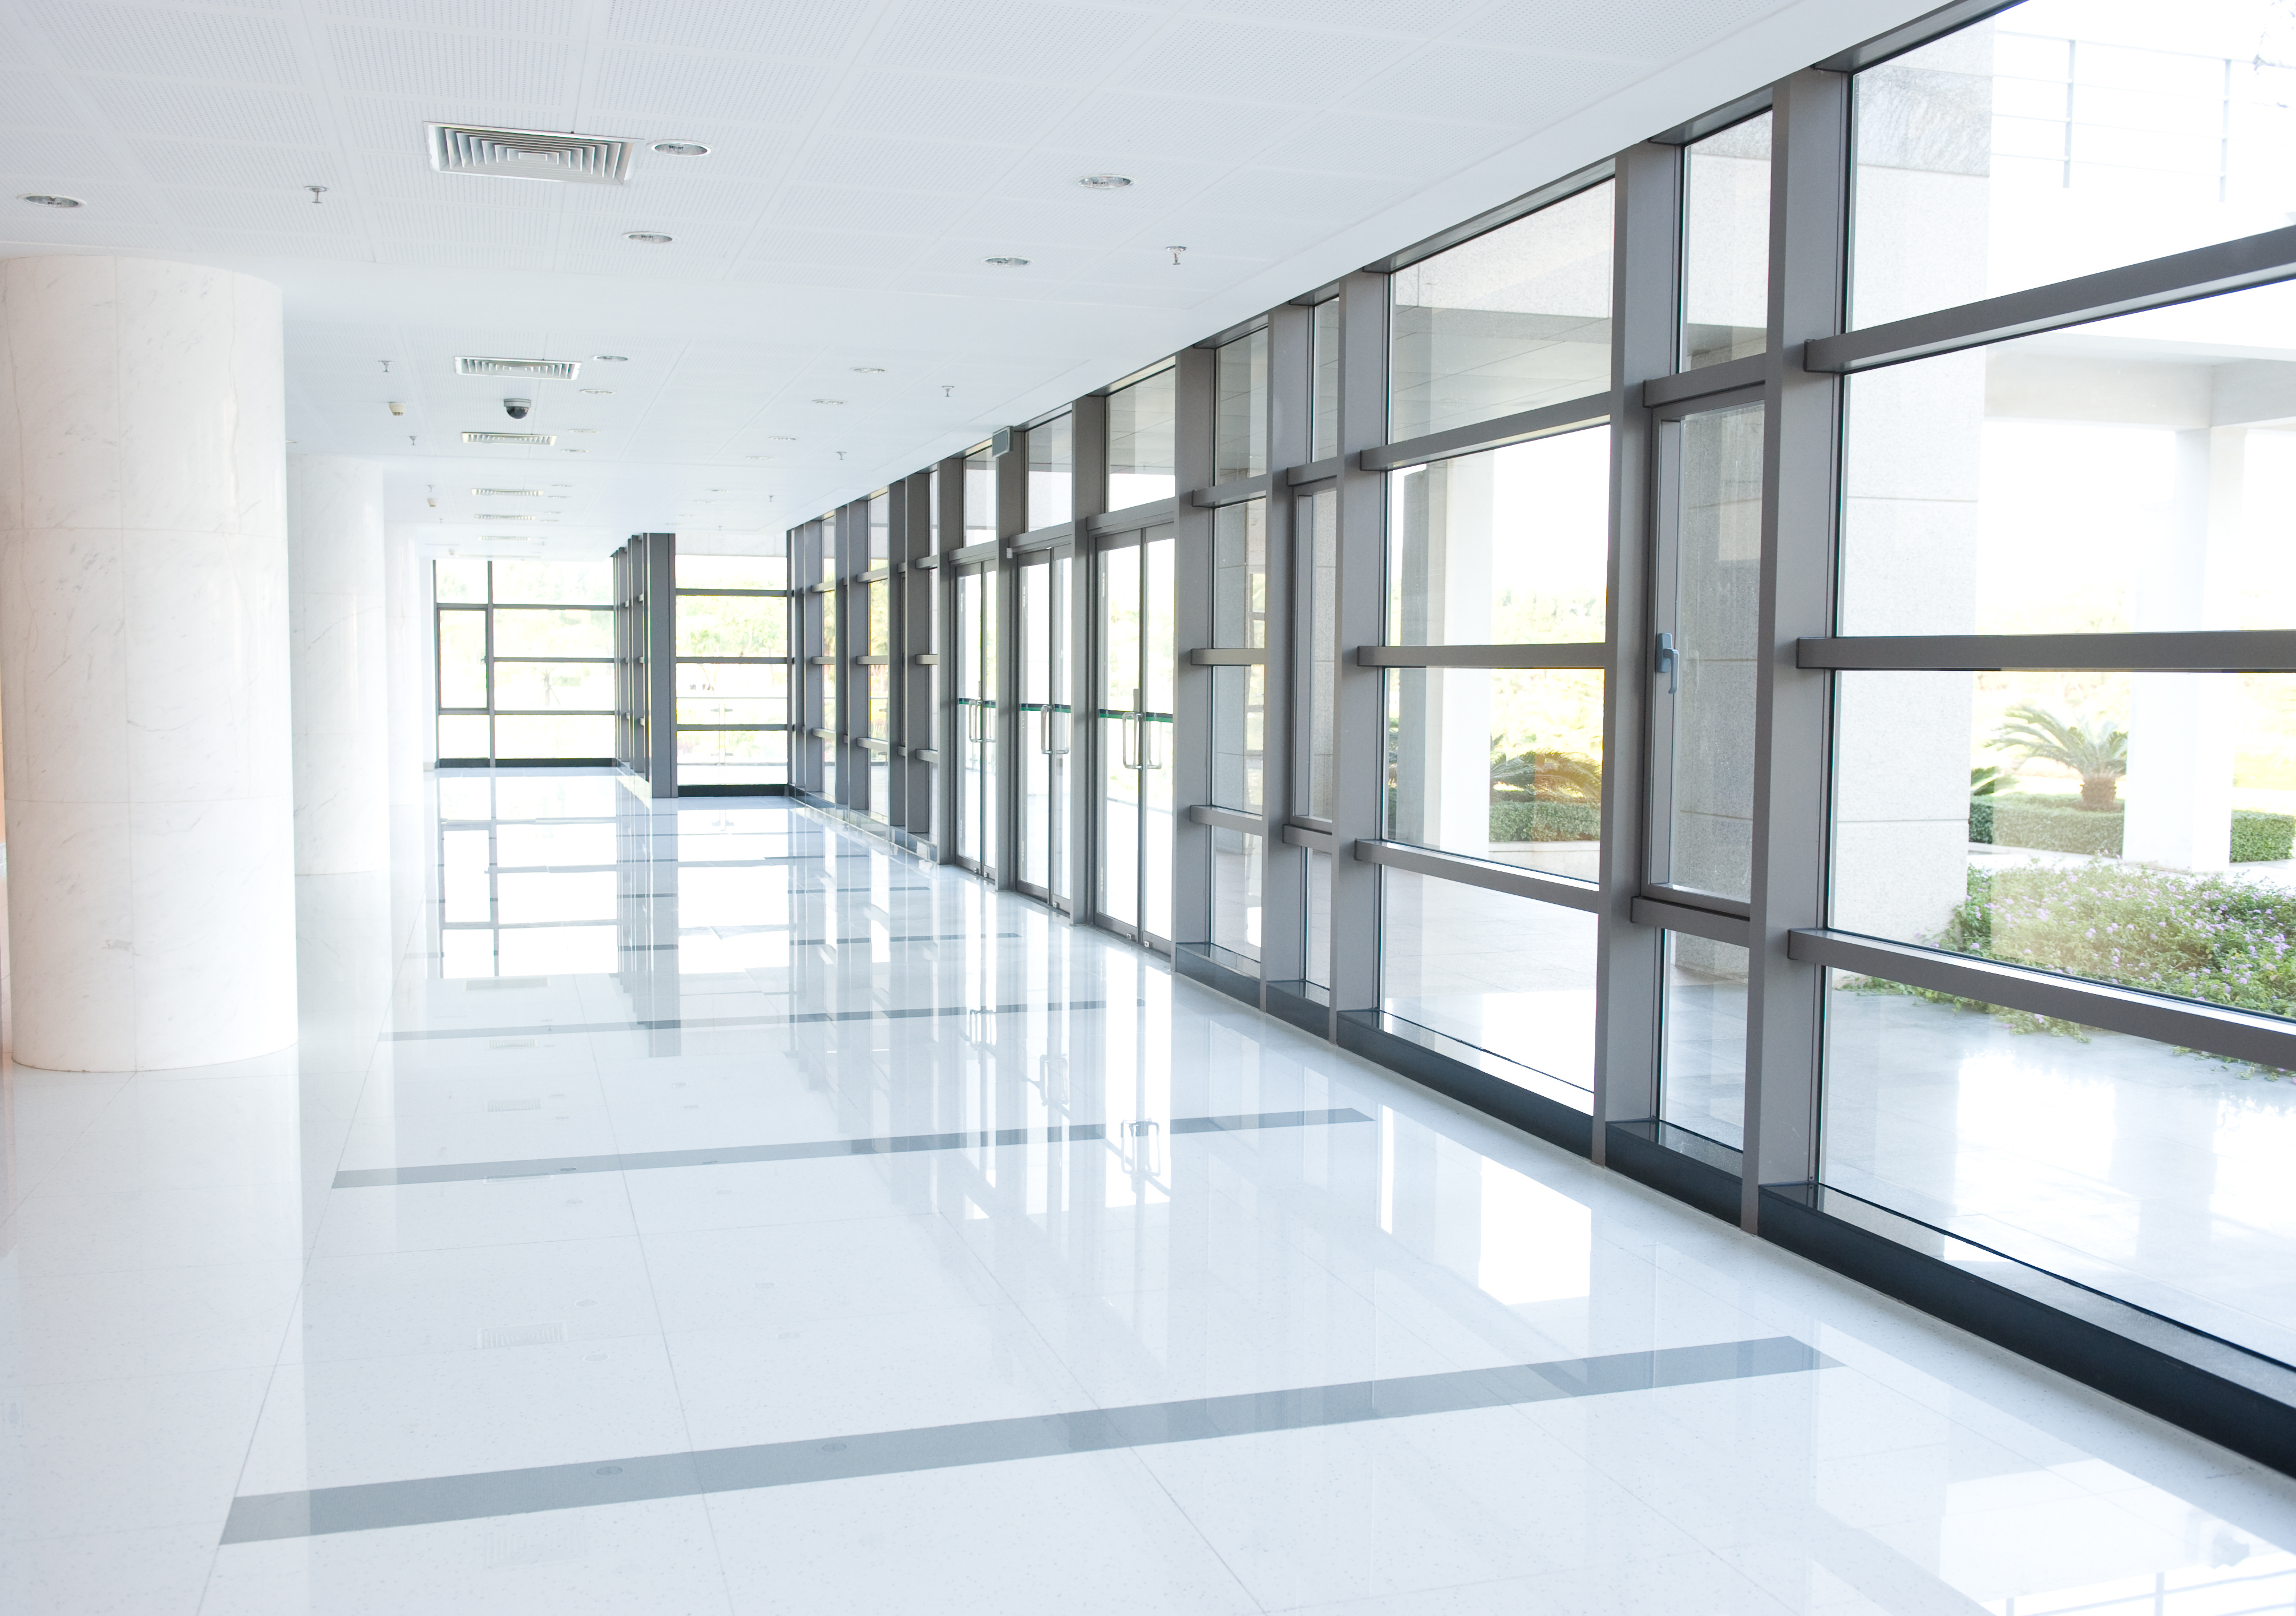 Ideal Flooring Systems For The Healthcare Industry